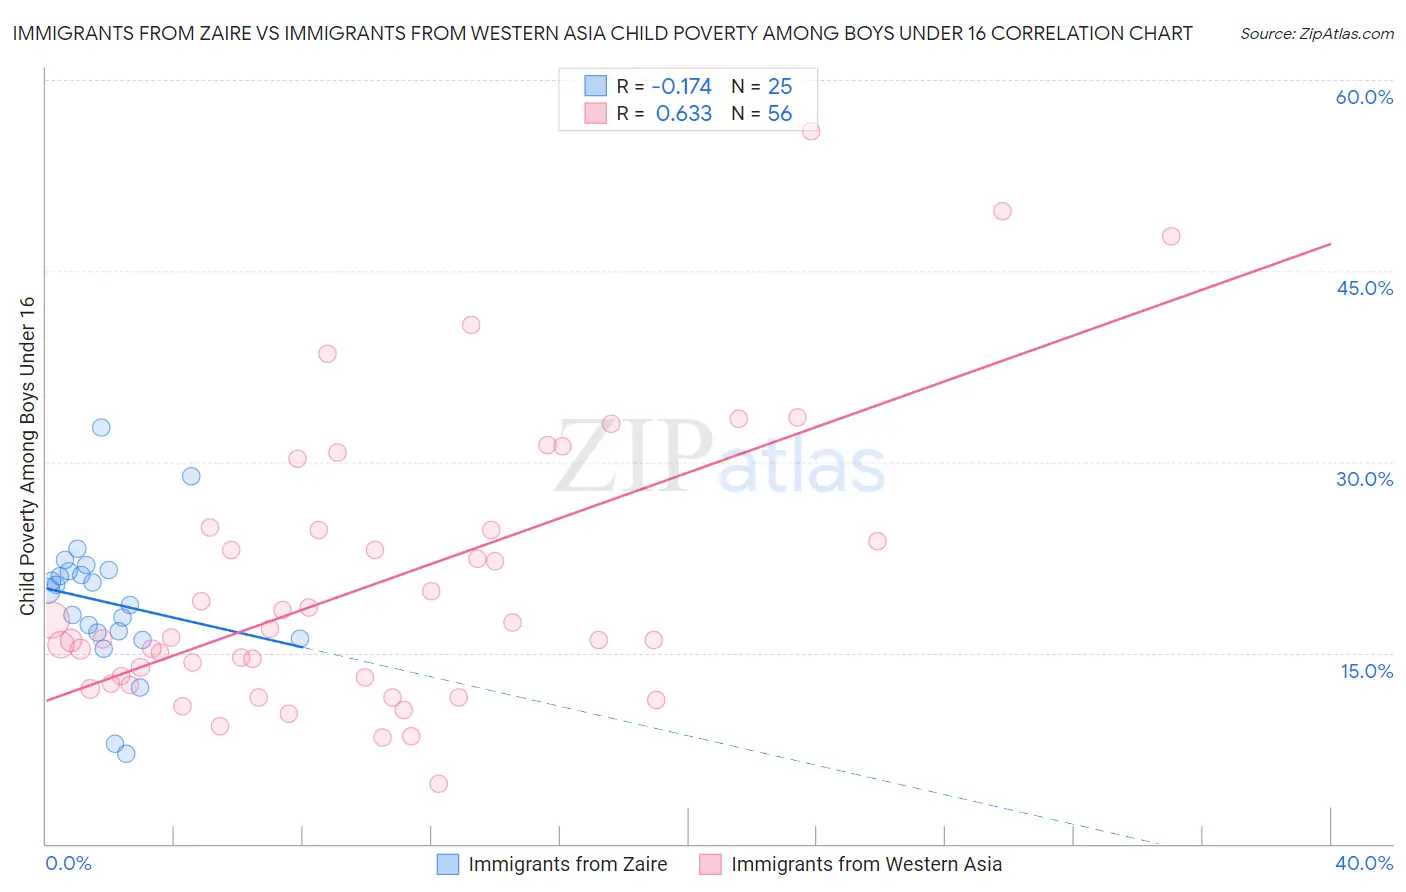 Immigrants from Zaire vs Immigrants from Western Asia Child Poverty Among Boys Under 16